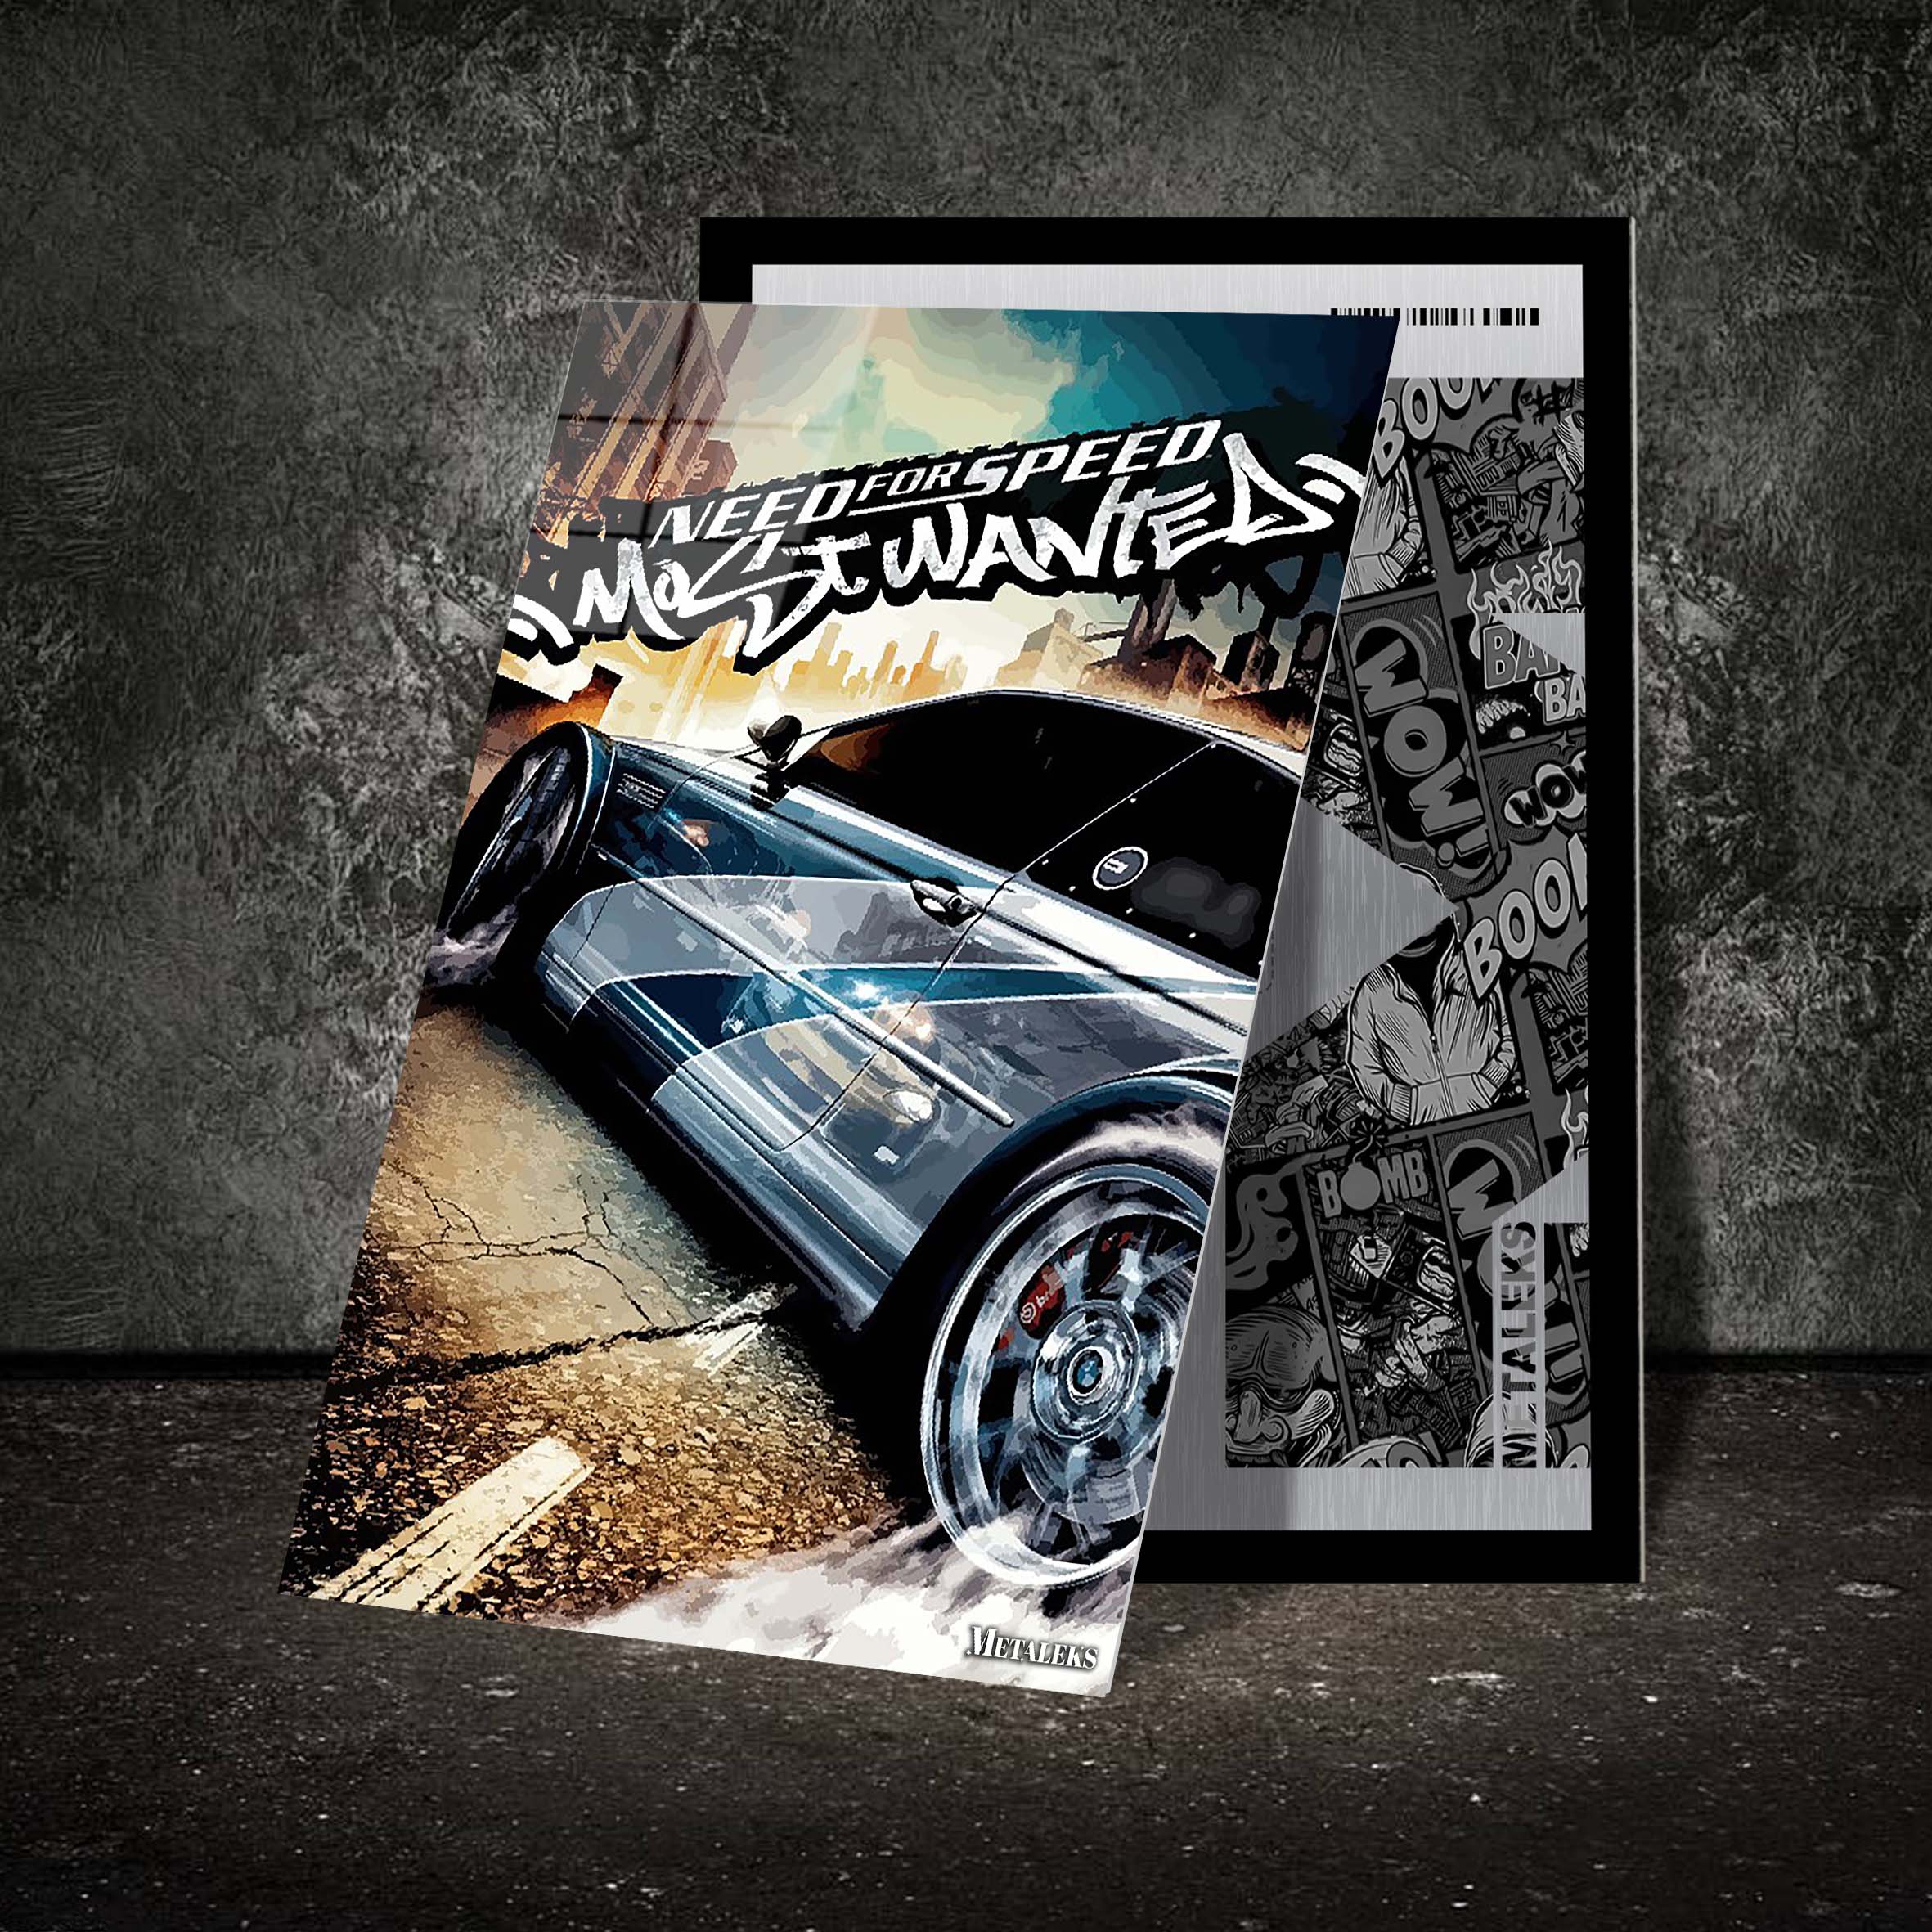 Need For Speed Mostwanted-designed by @HLLM